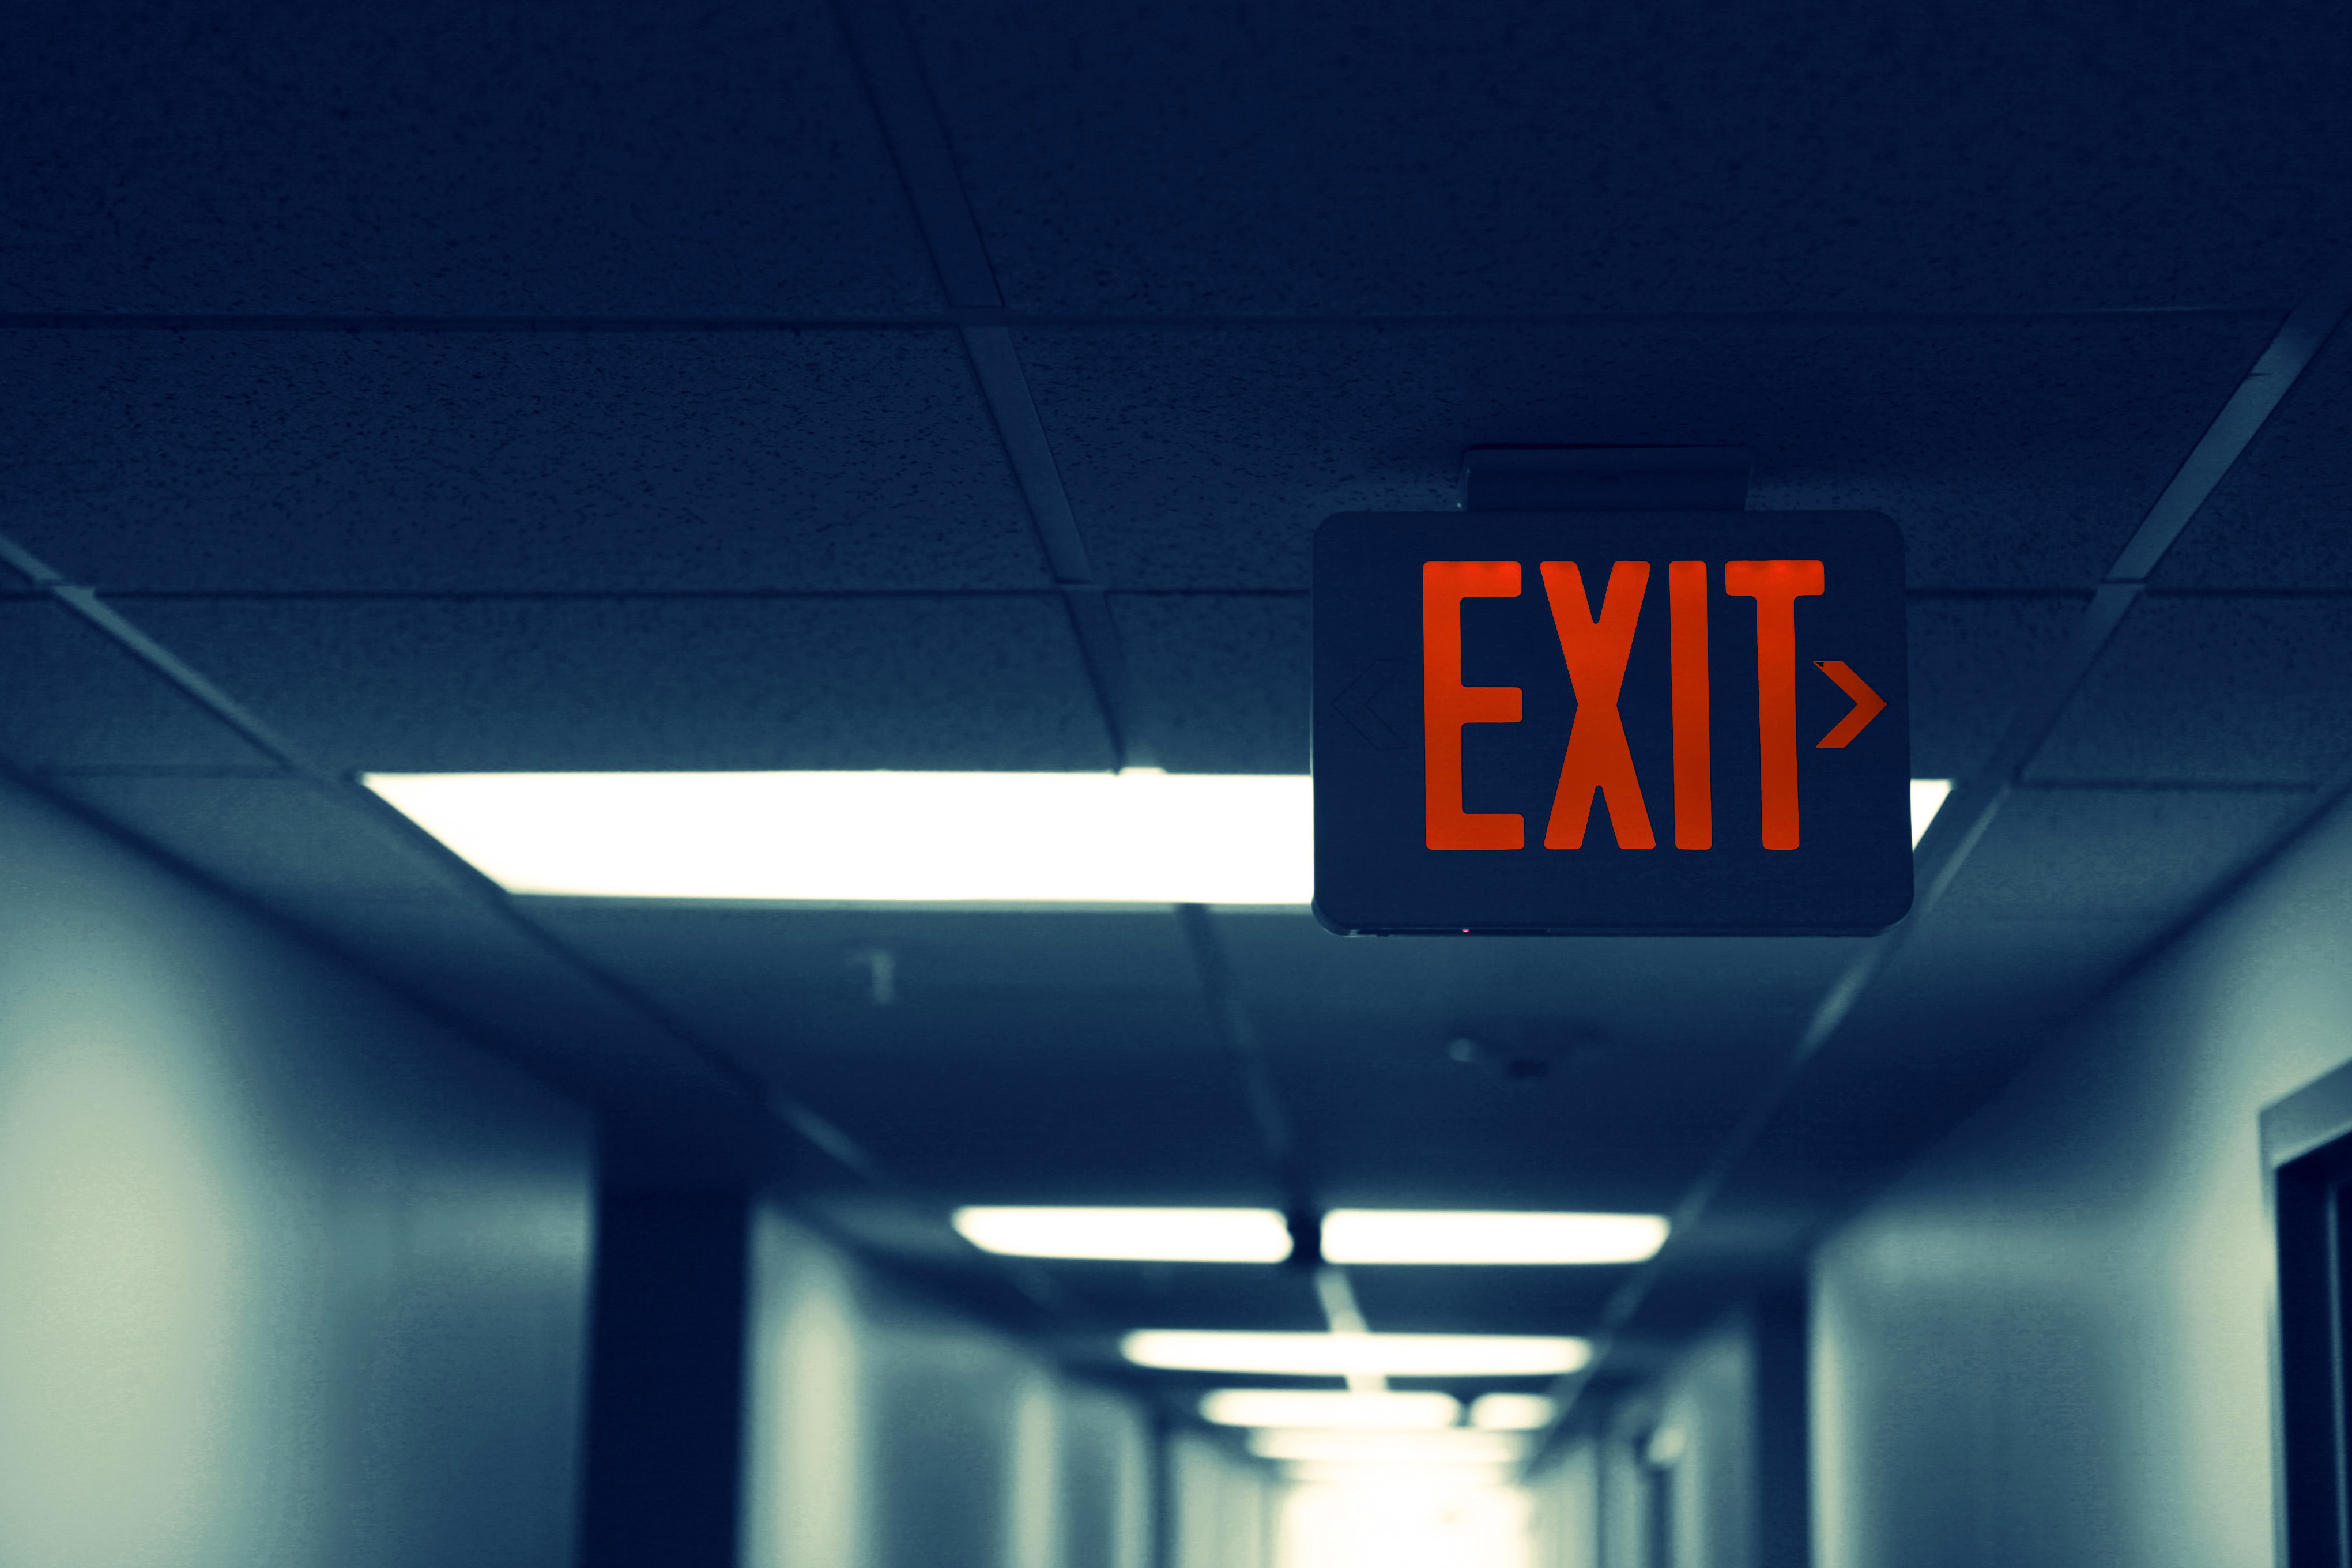 A red-glowing exit sign hangs above a hall way's ceiling.